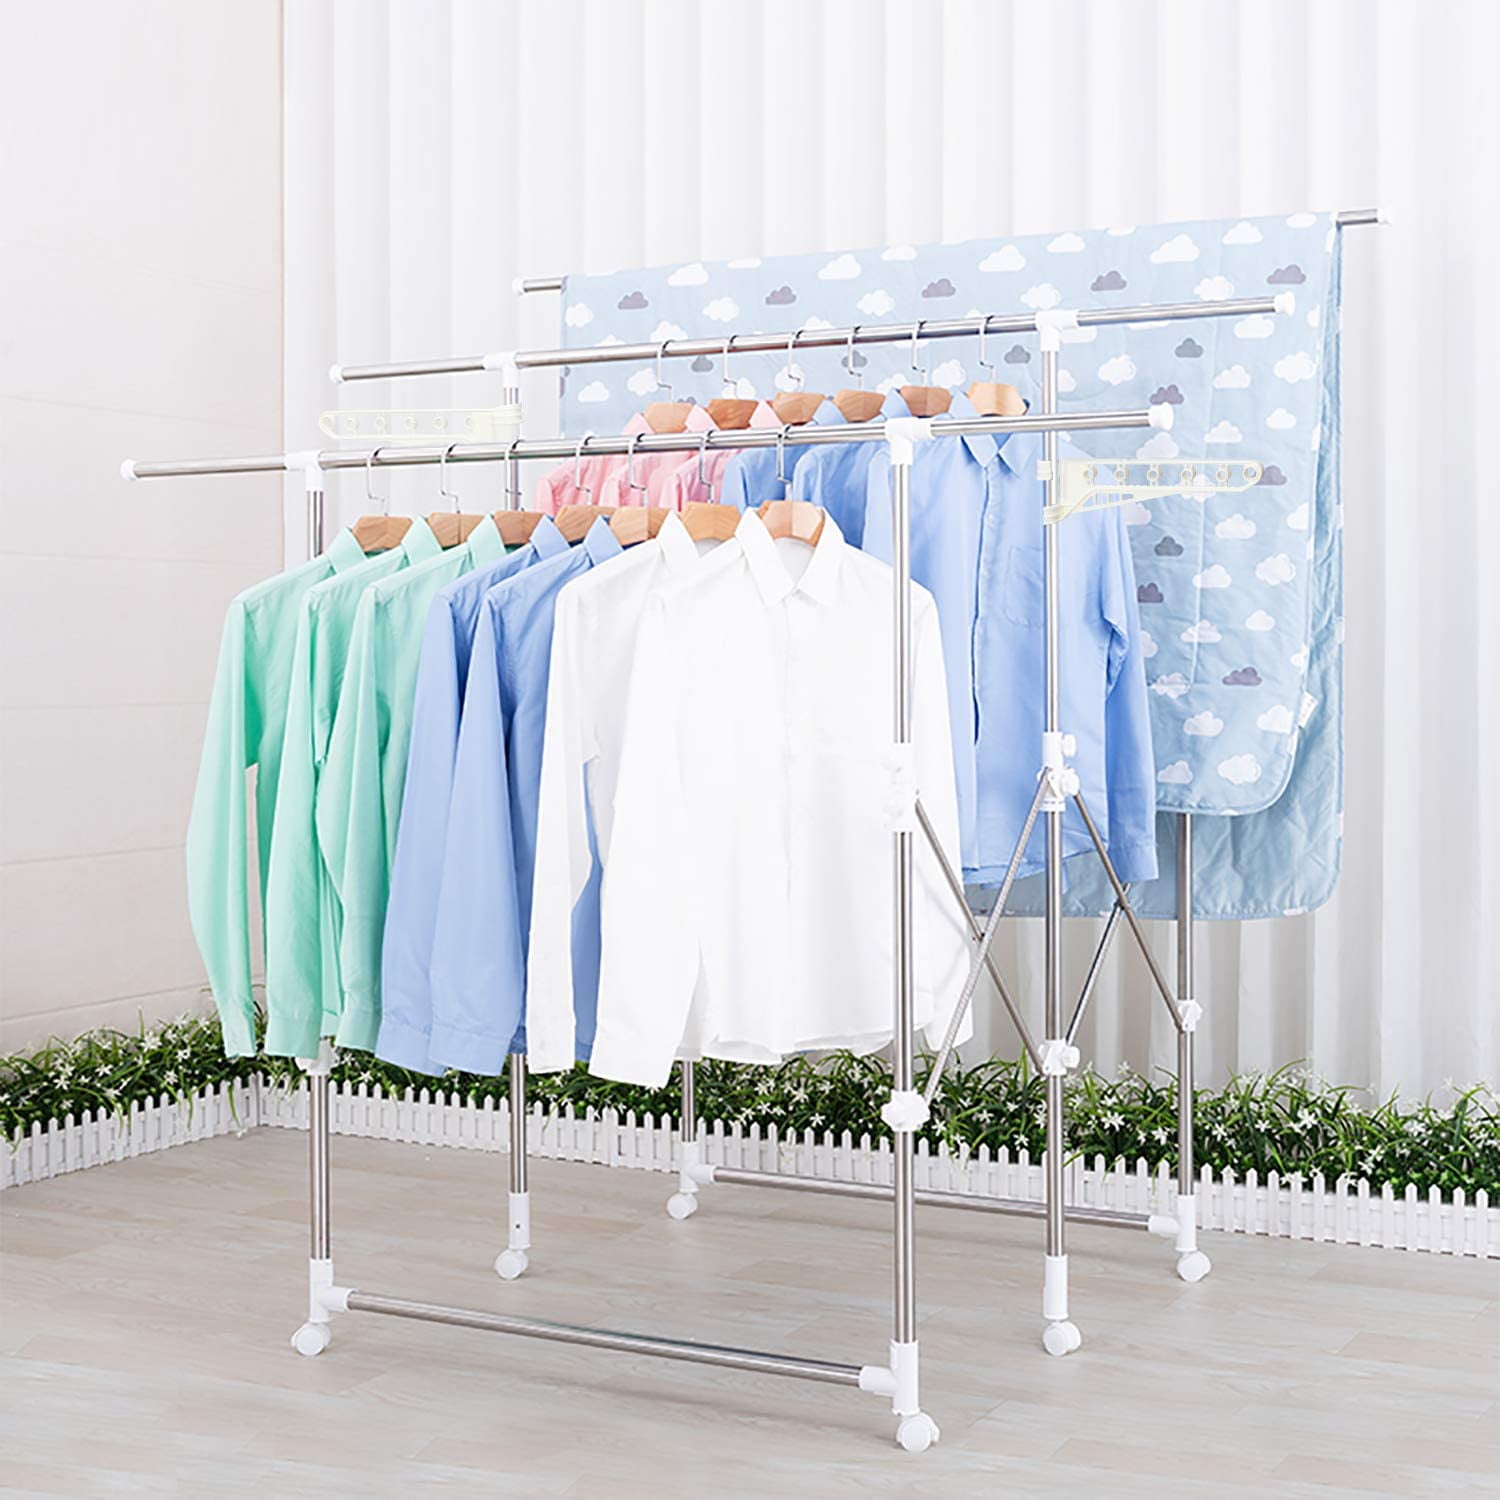 18M METAL CONCERTINA DRYING AIRER FOLDING TOWEL LAUNDRY RACK RAIL GULLWING DRYER 